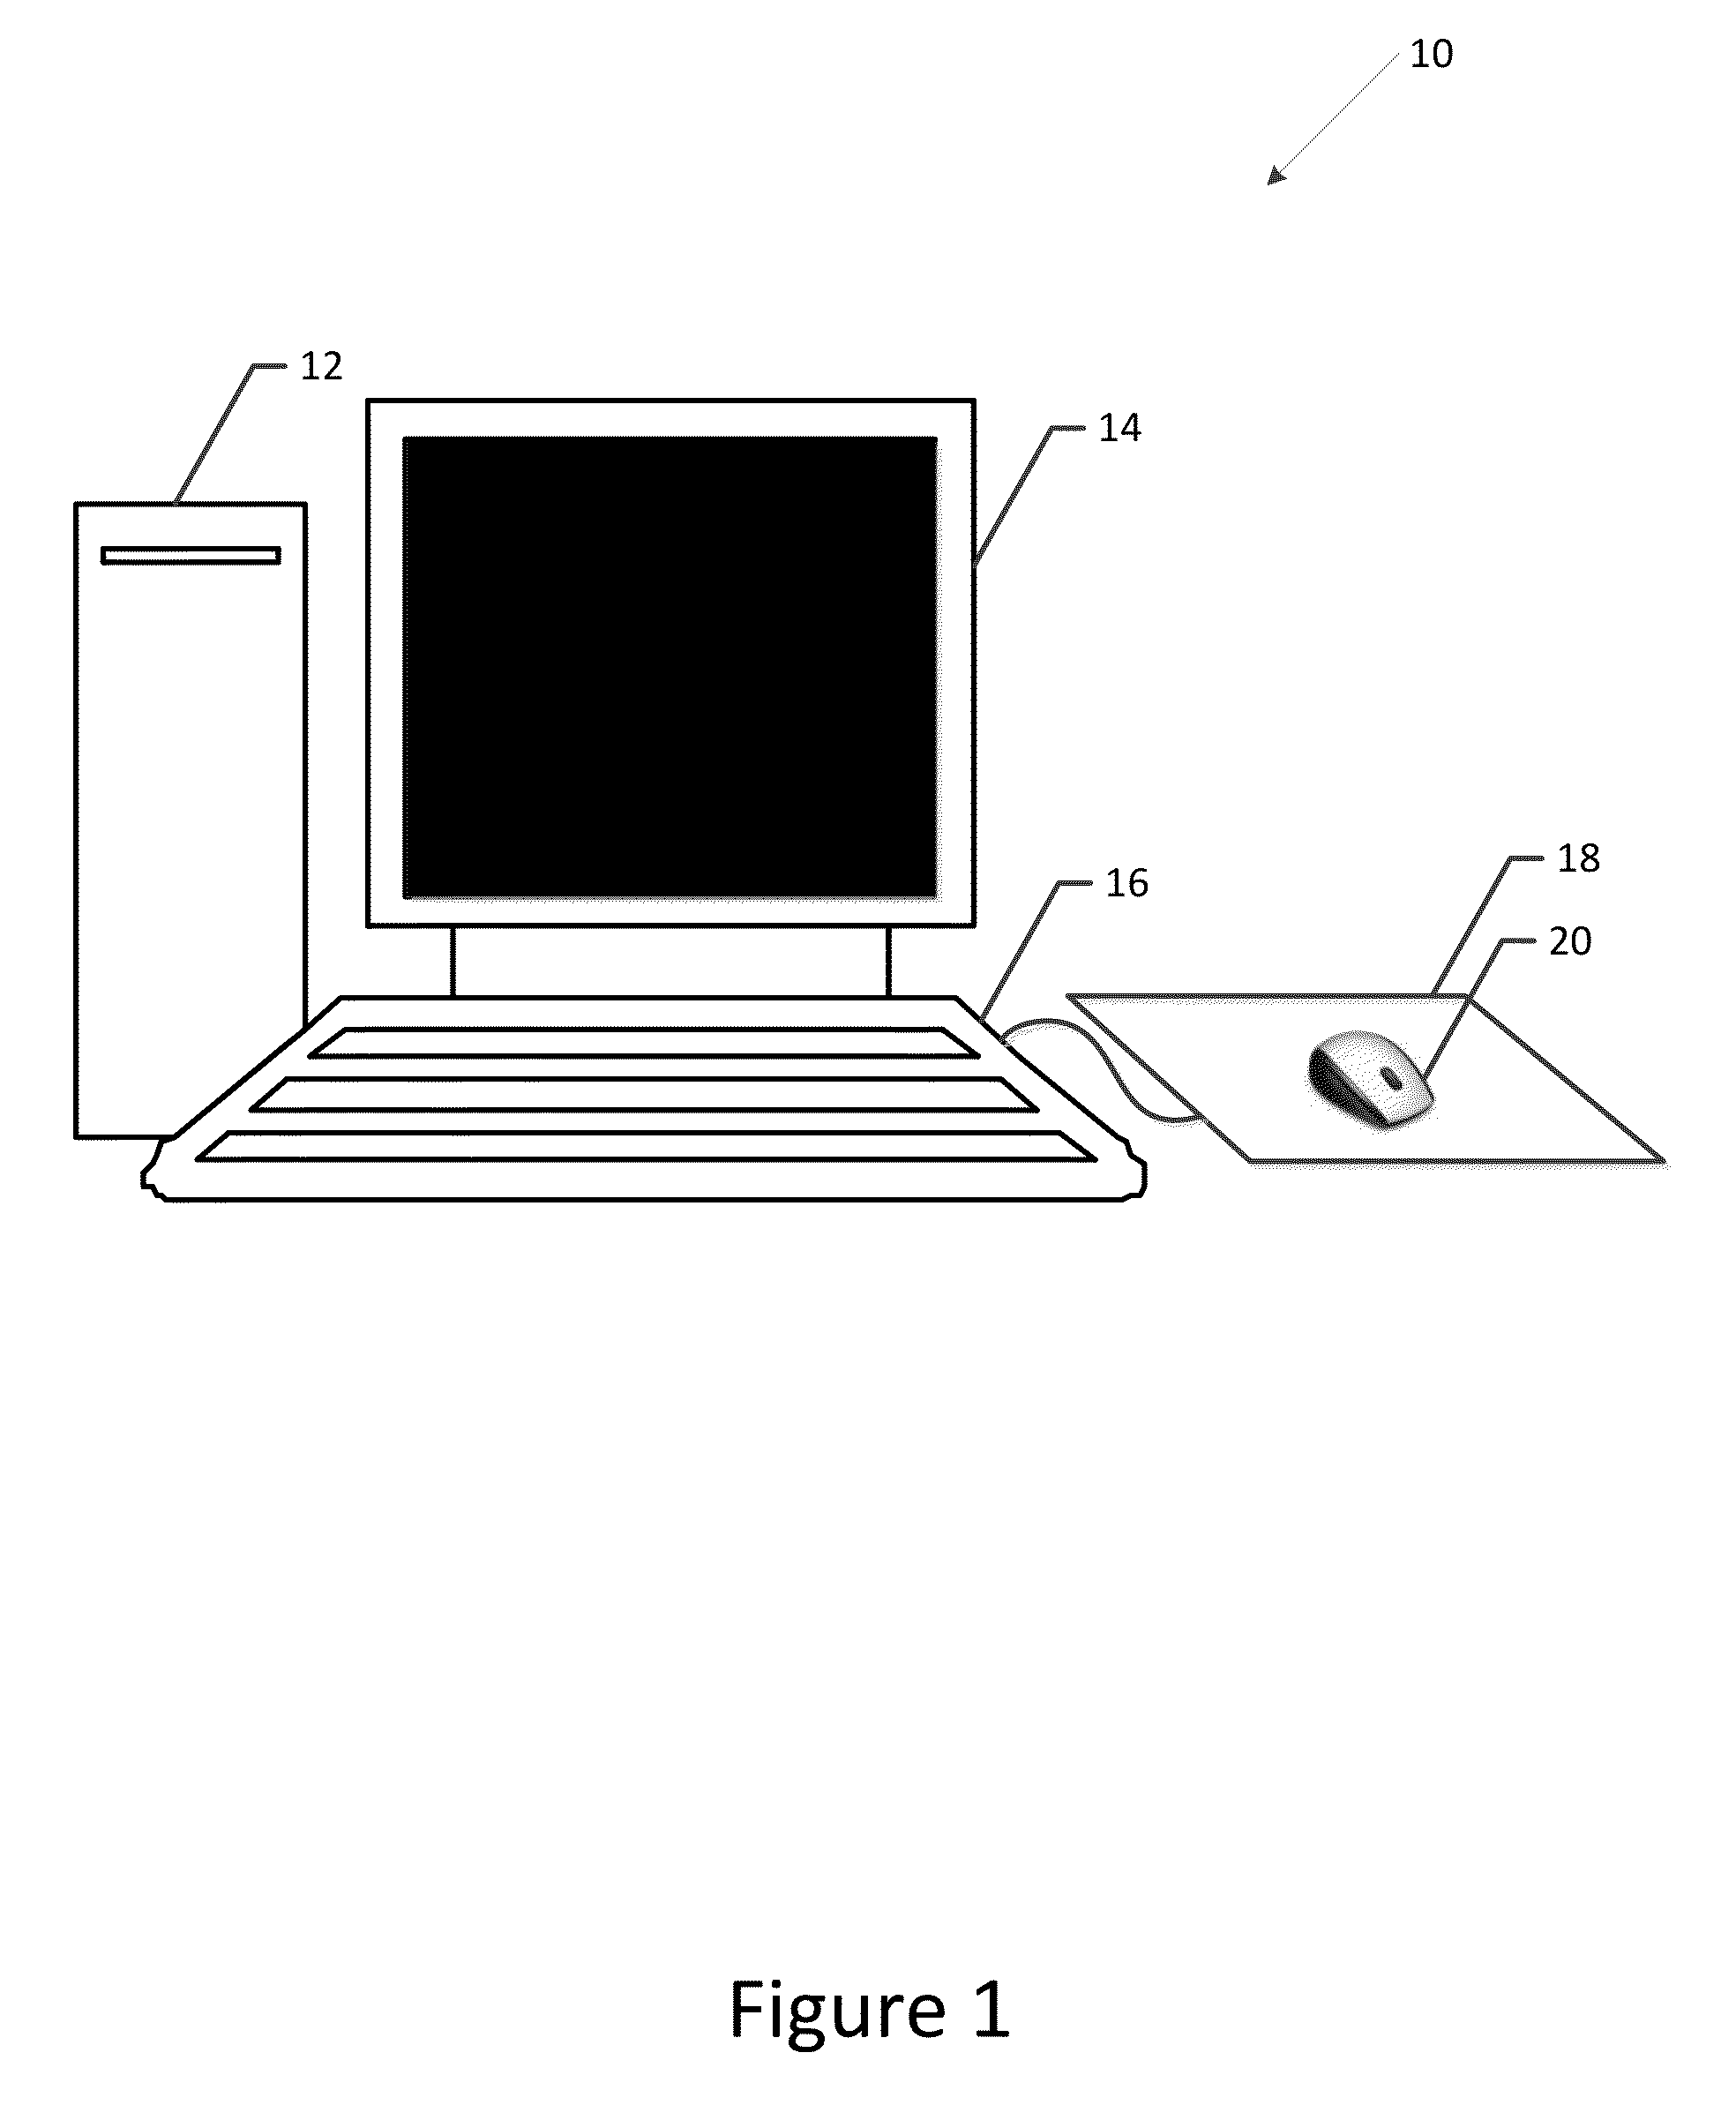 Method and apparatus for providing touch input via a touch sensitive surface utilizing a support object